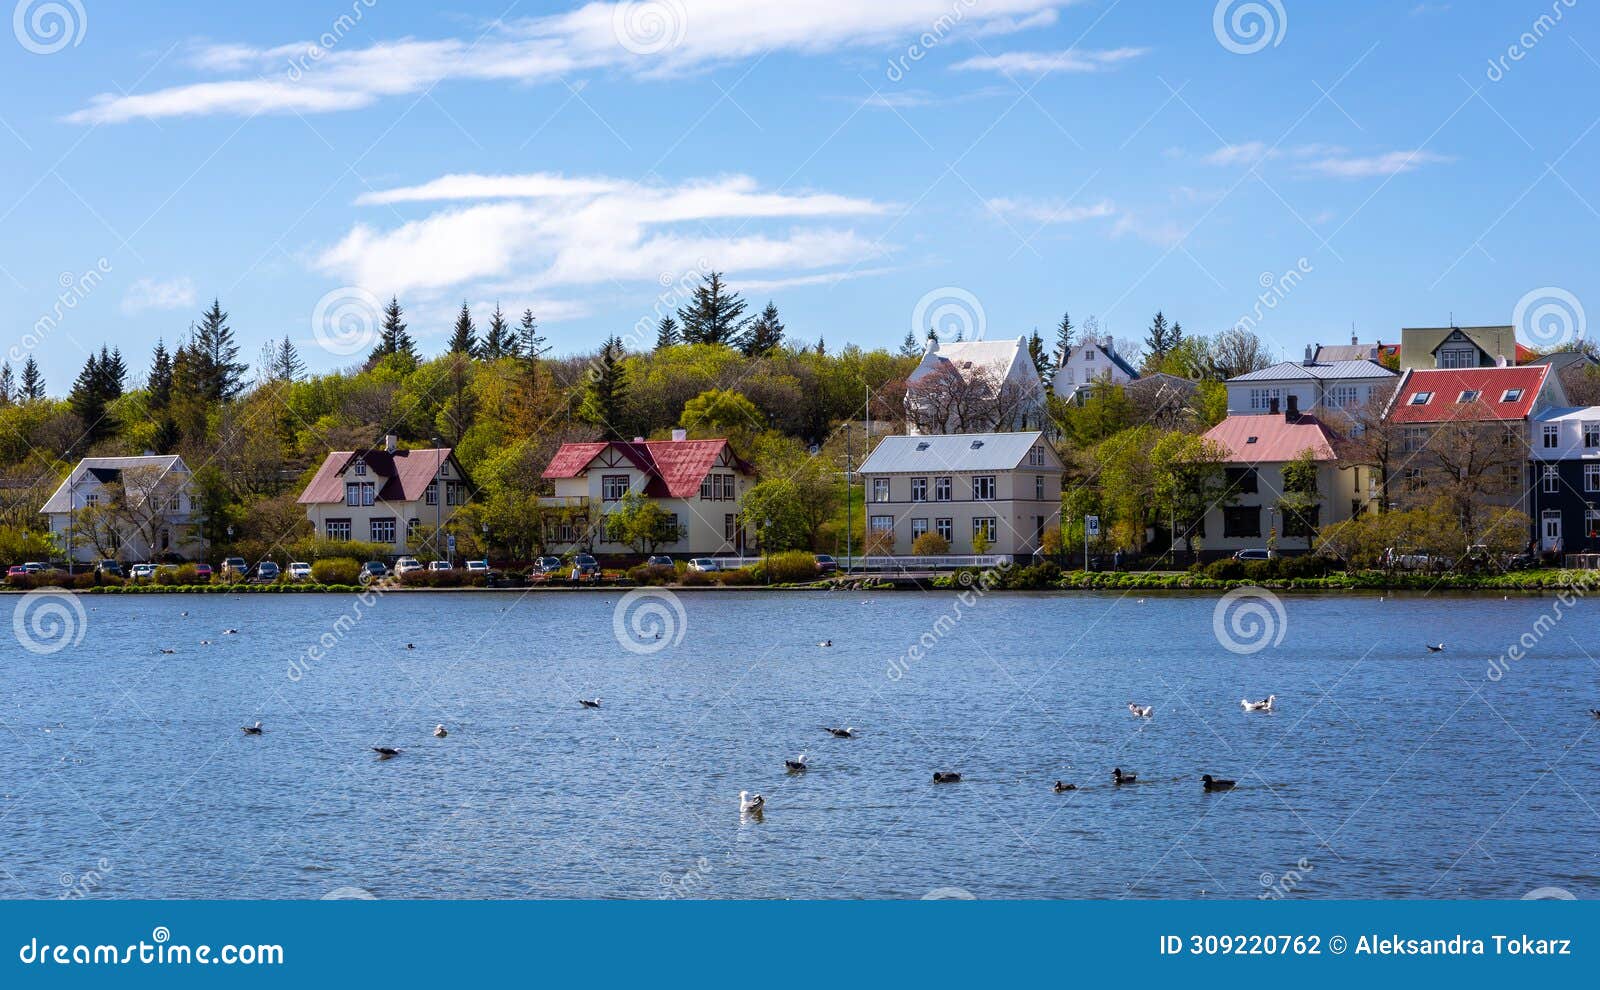 traditional residential ironclad houses surrounded by green vegetation, by the blue tjornin lake, reykjavik, iceland